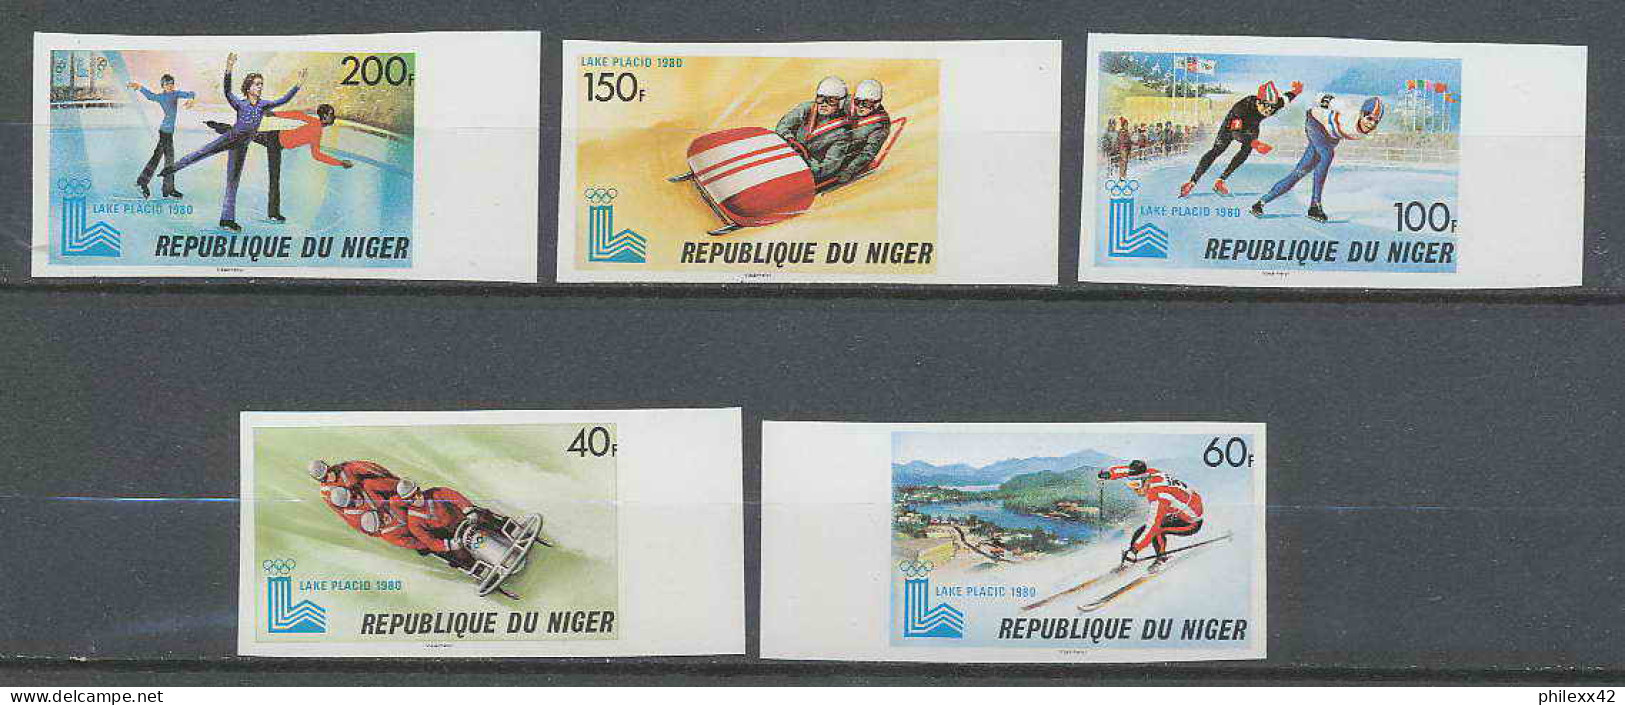 Niger 027a N°492/496 Non Dentelé Imperf Jeux Olympiques Olympic Games Lake Placid 80 MNH ** - Winter 1980: Lake Placid